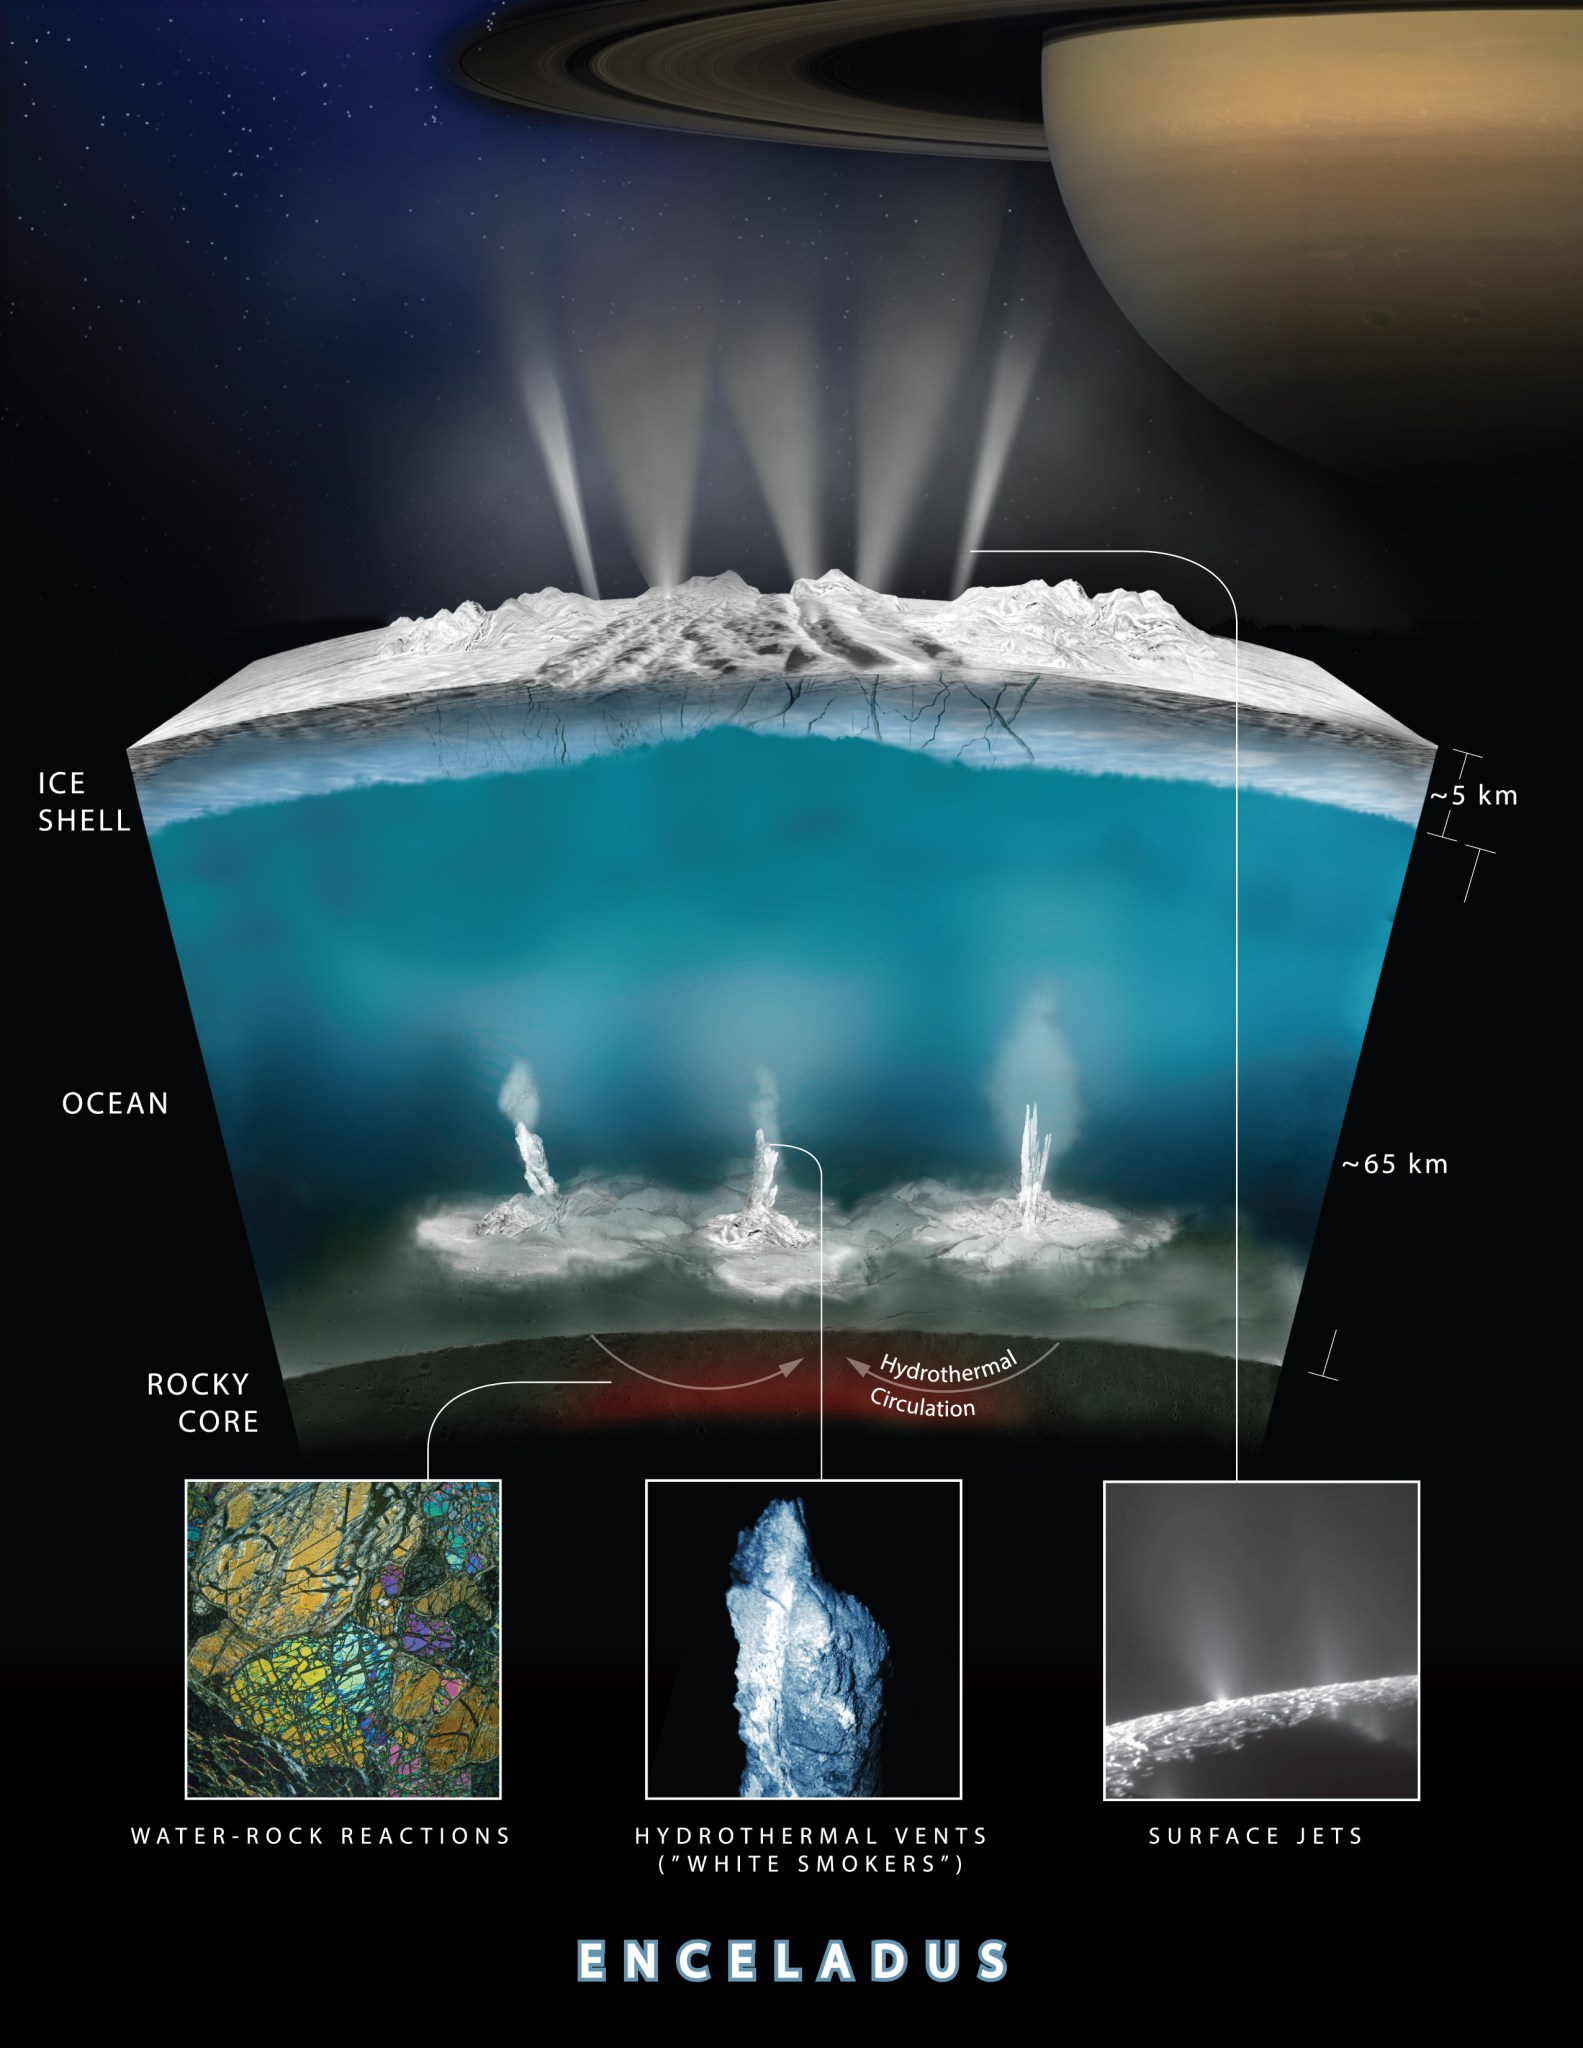 Artist rendering showing an interior cross-section of the crust of Enceladus